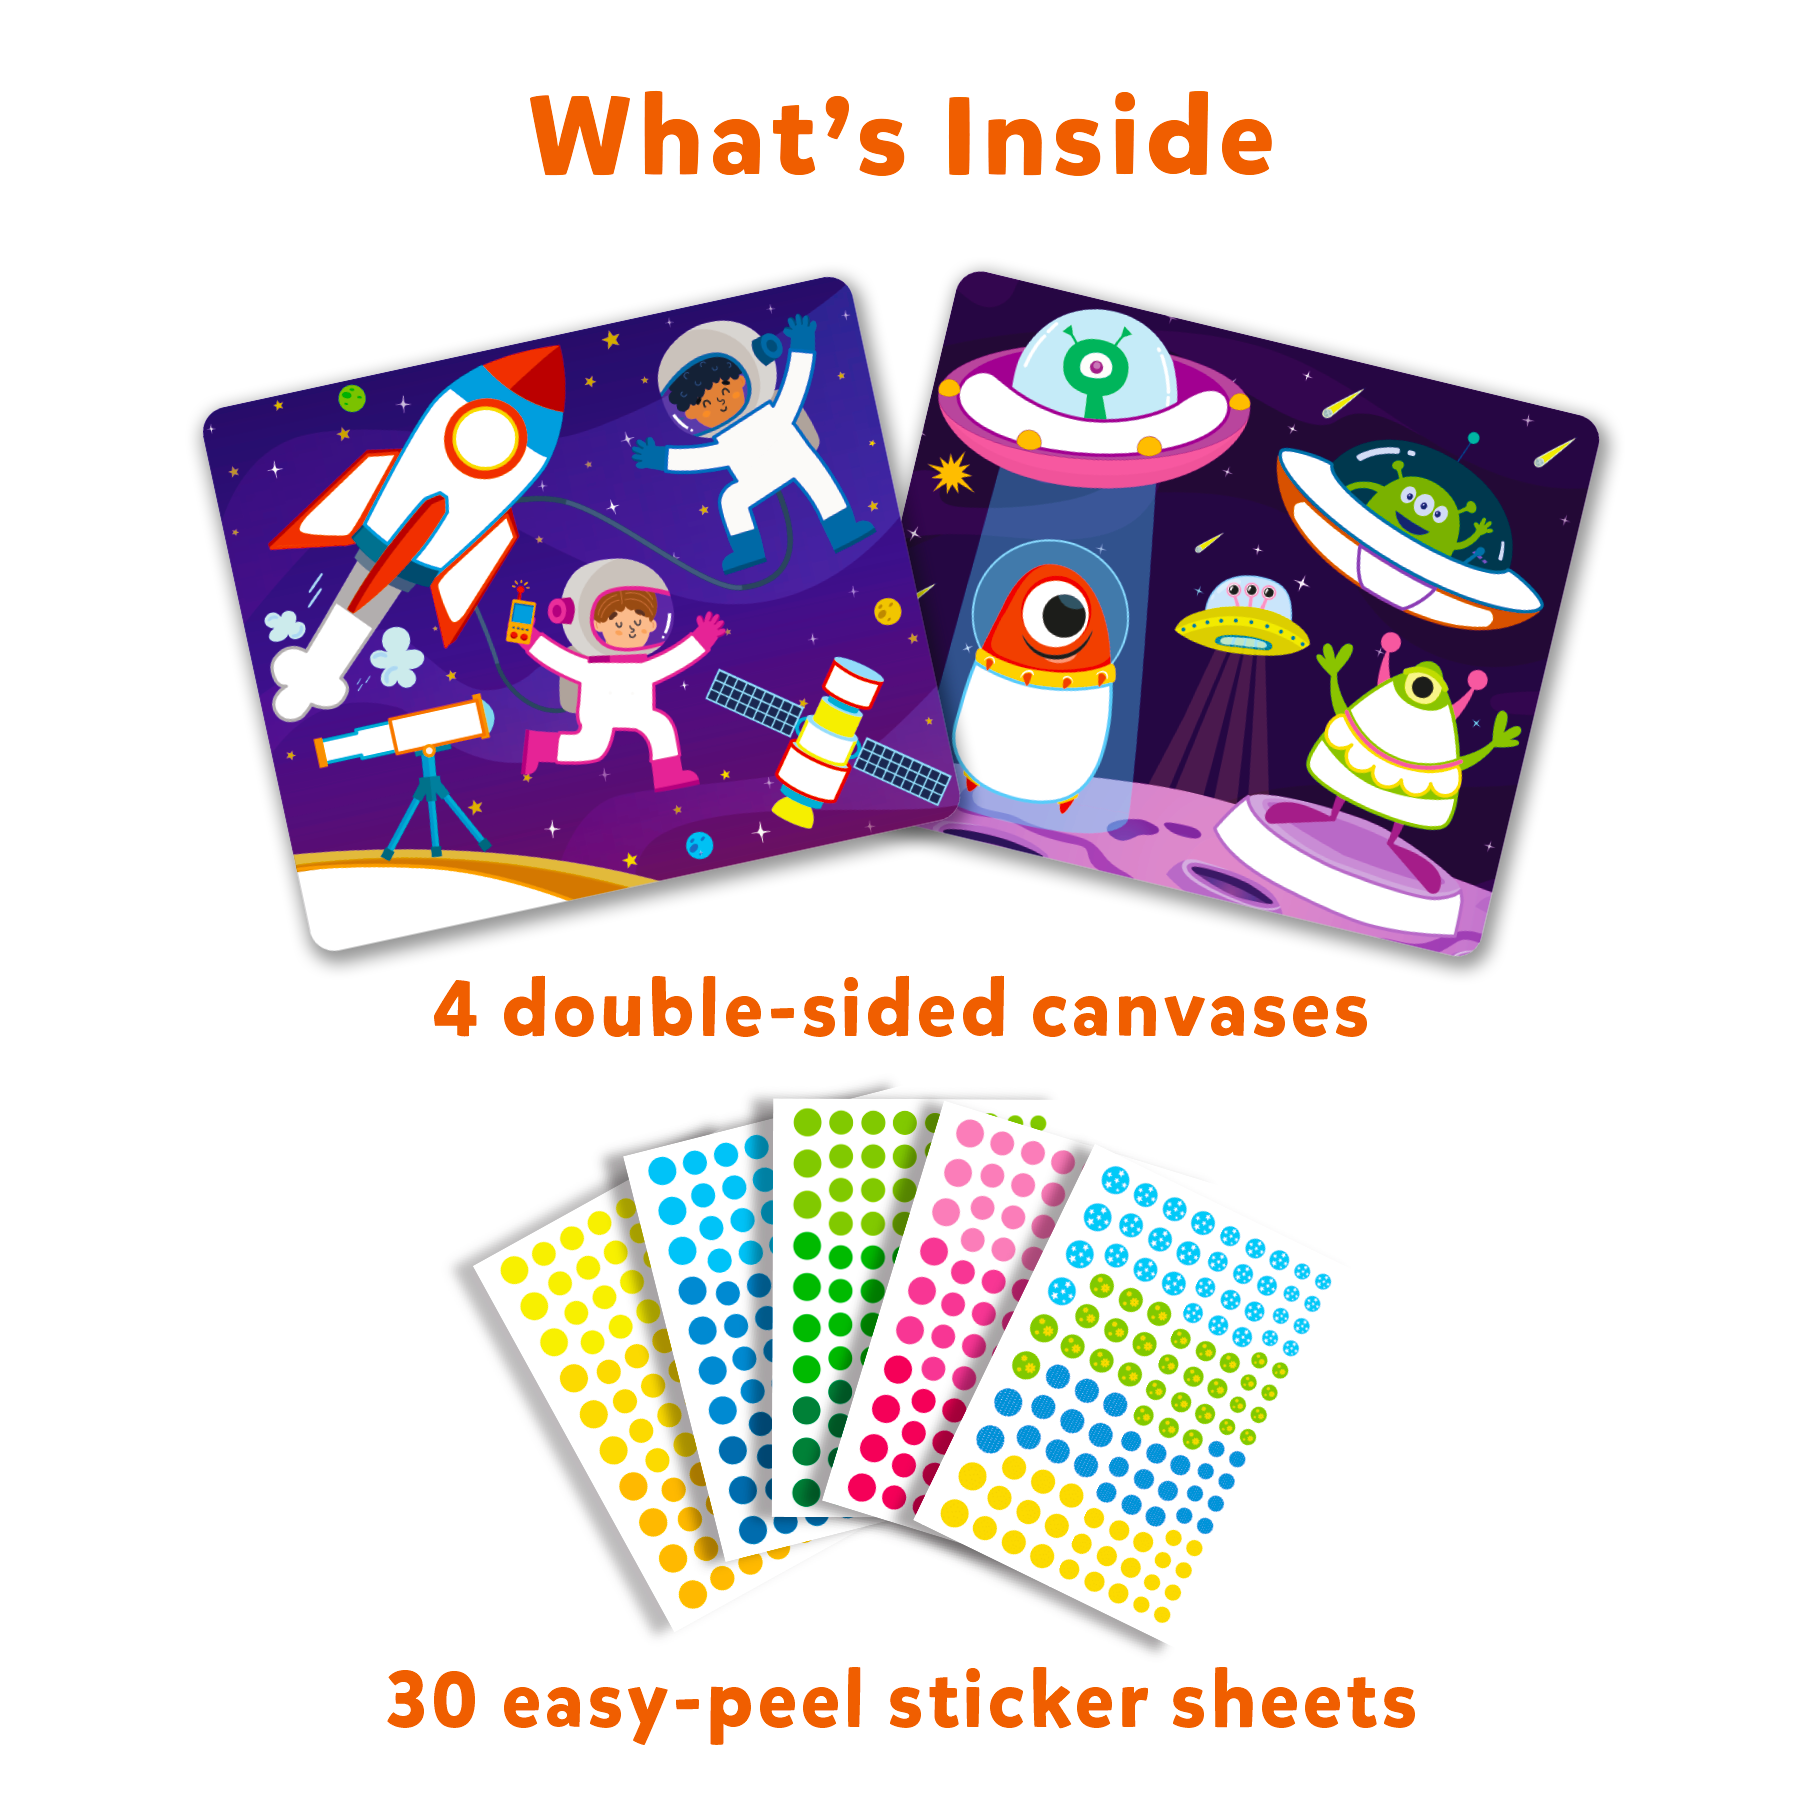 Skillmatics Art Activity Dot It - No Mess Sticker Art, 8 Space Themed Pictures, Gifts for Ages 3 to 7